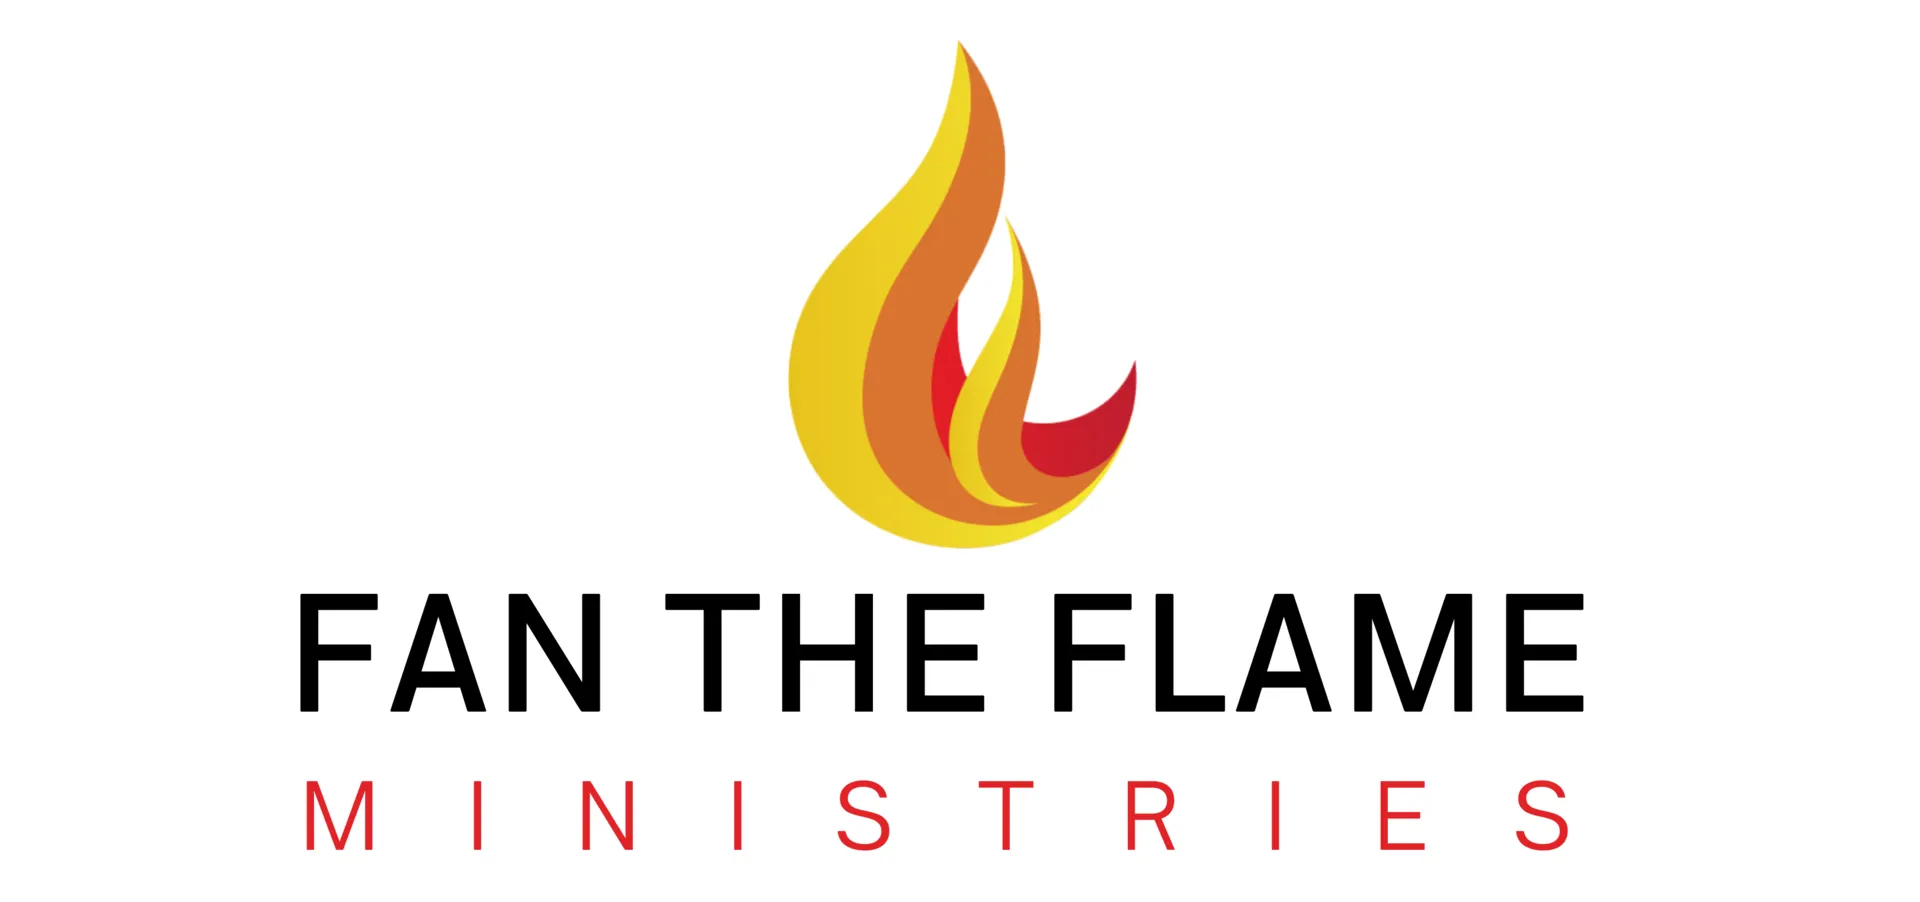 FAN THE FLAME MINISTRIES 